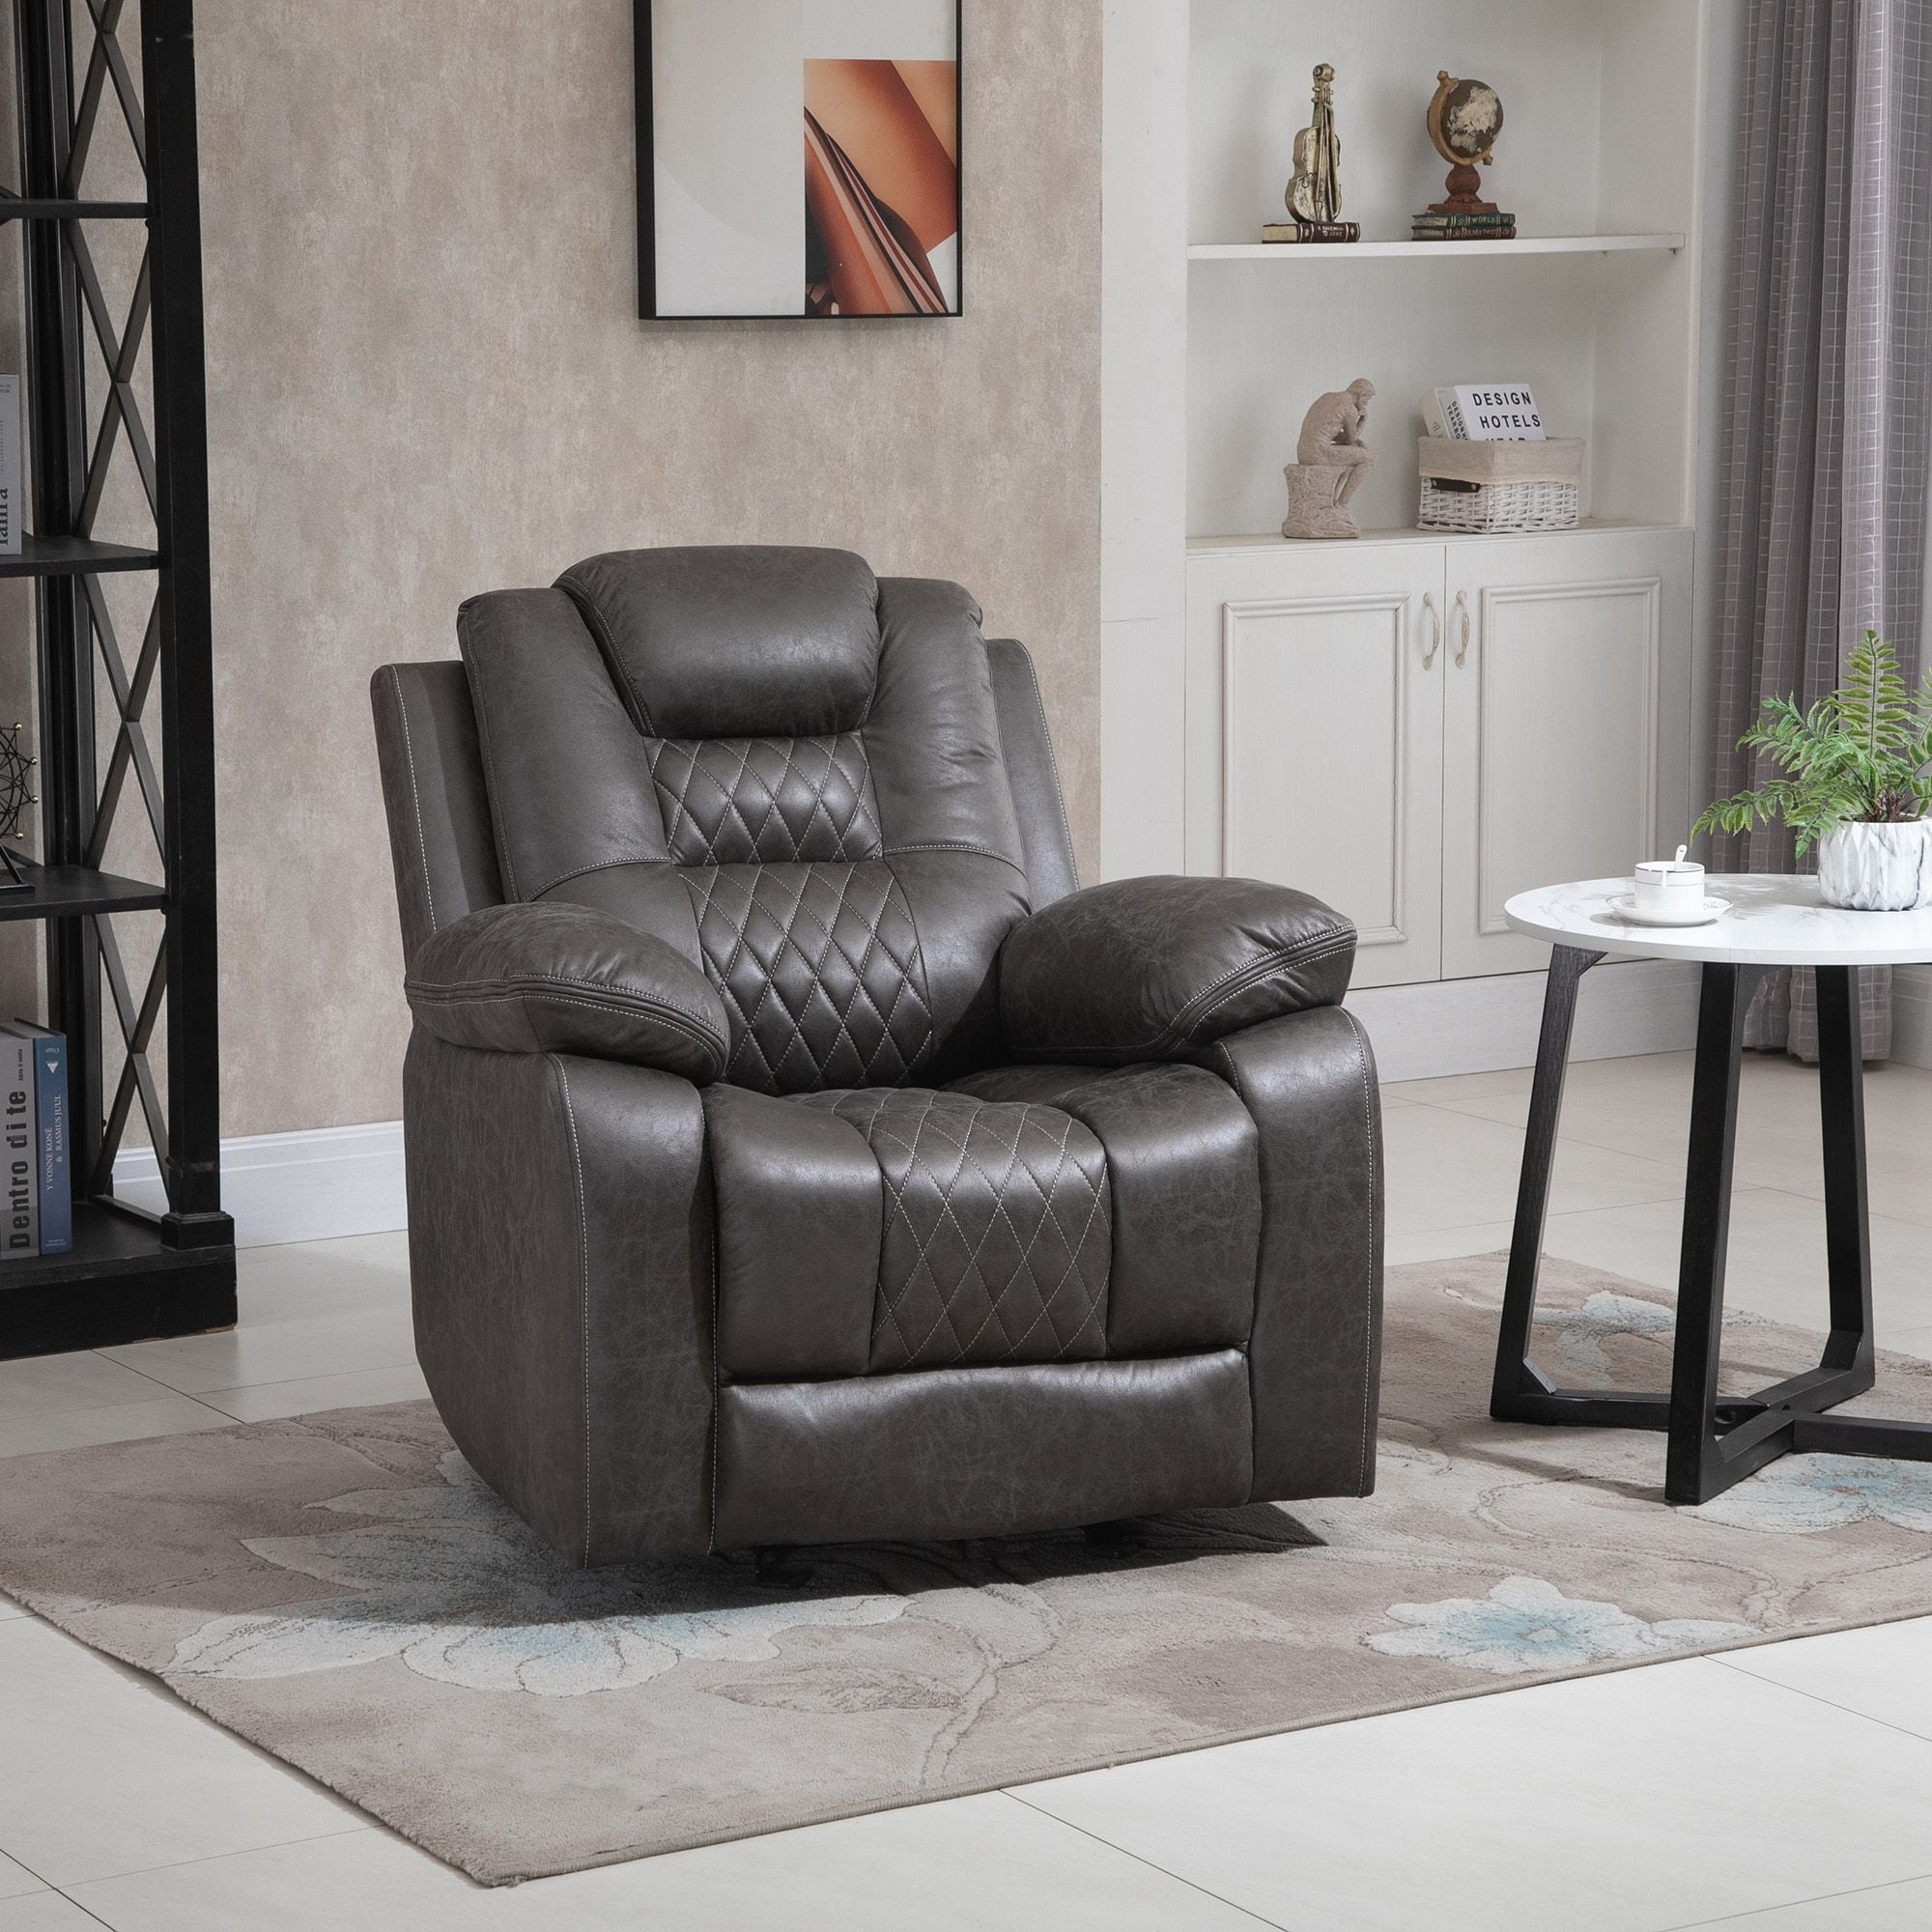 HOMCOM Living Room Chair Recliner Manual Recliner Sofa With